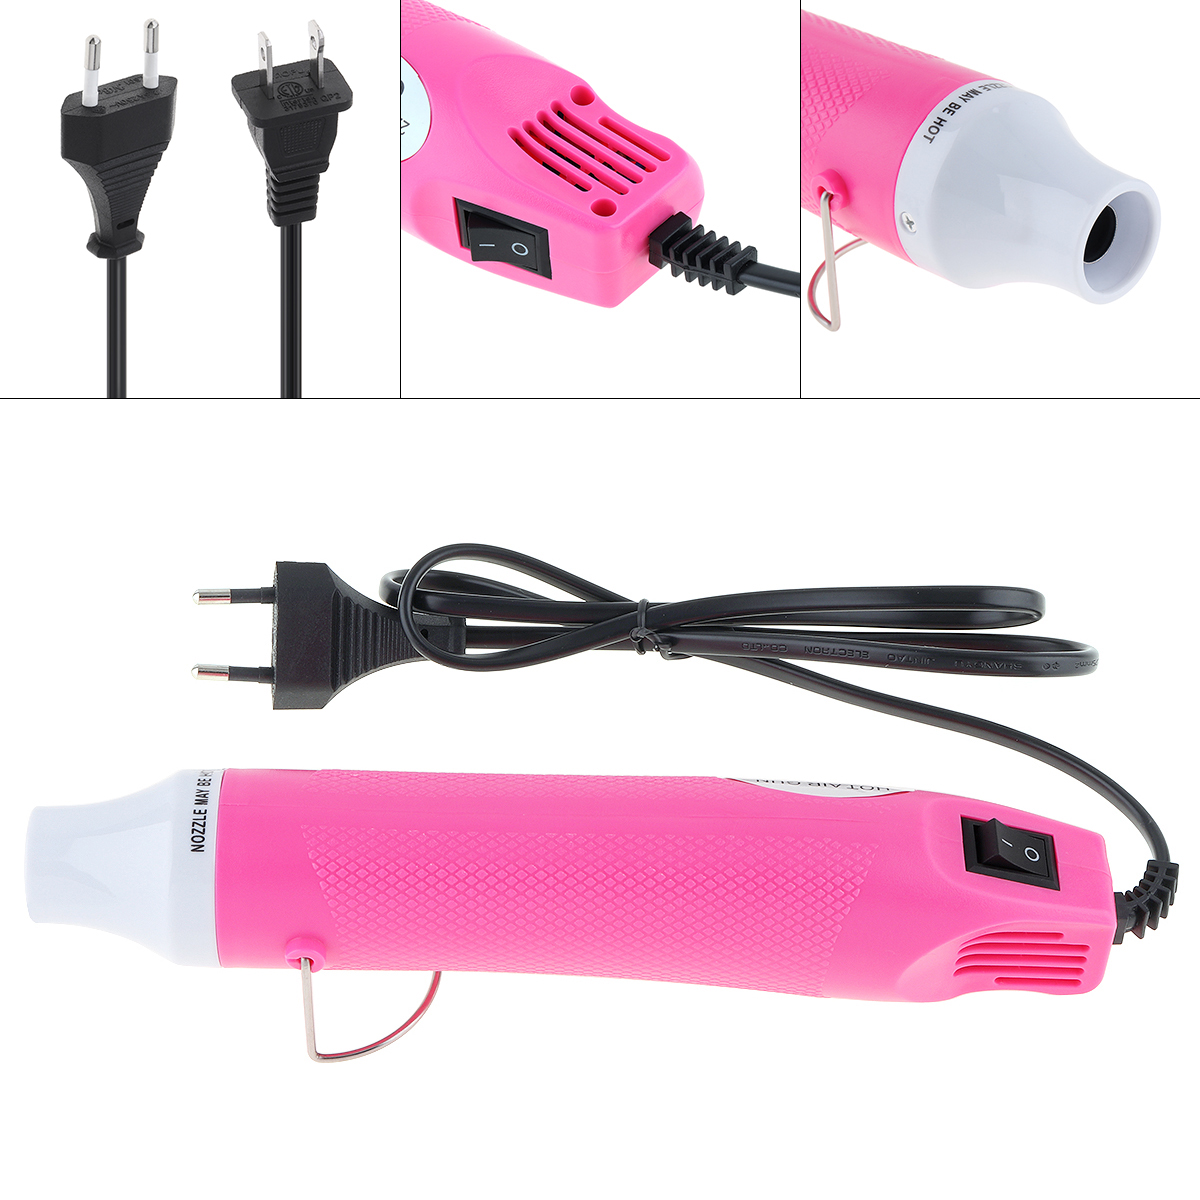 110V / 220V 300W Heat Gun DIY Electric Blower Manual Tool with Shrink Plastic Surface and EU US Plug for Heating DIY Accessories